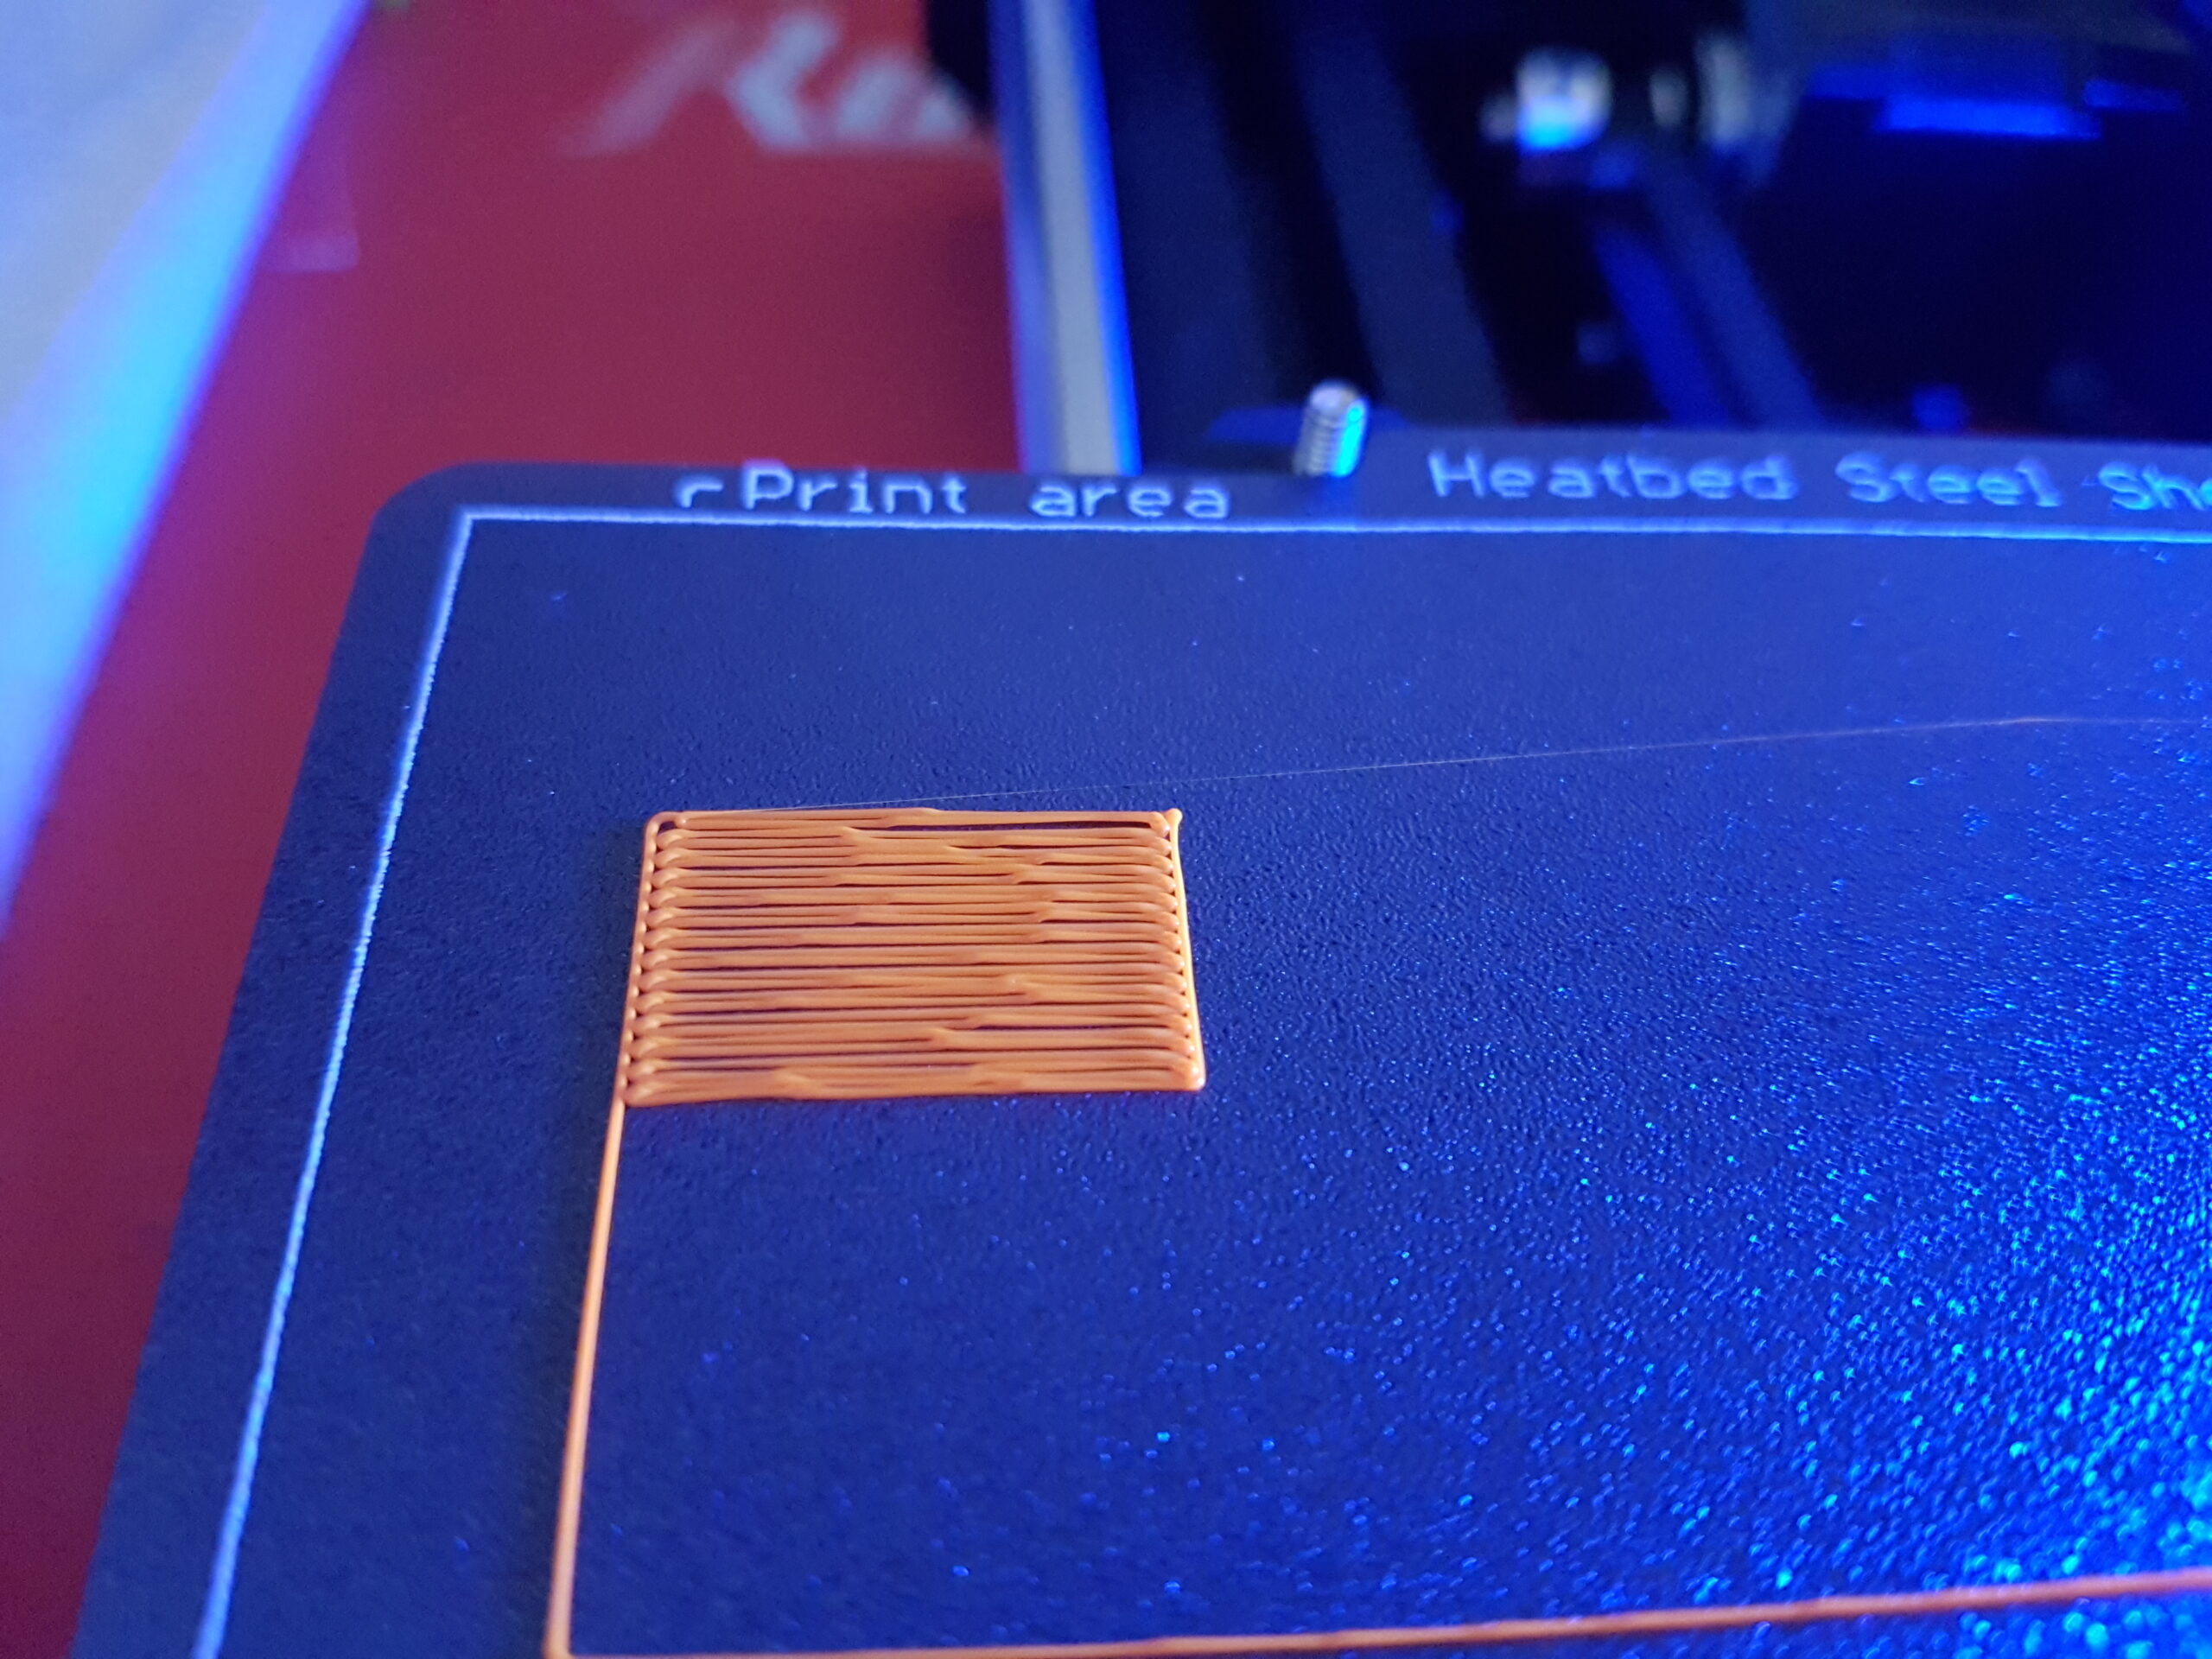 PETG first Layer test – How do I print this? (Printing help) – Prusa3D Forum